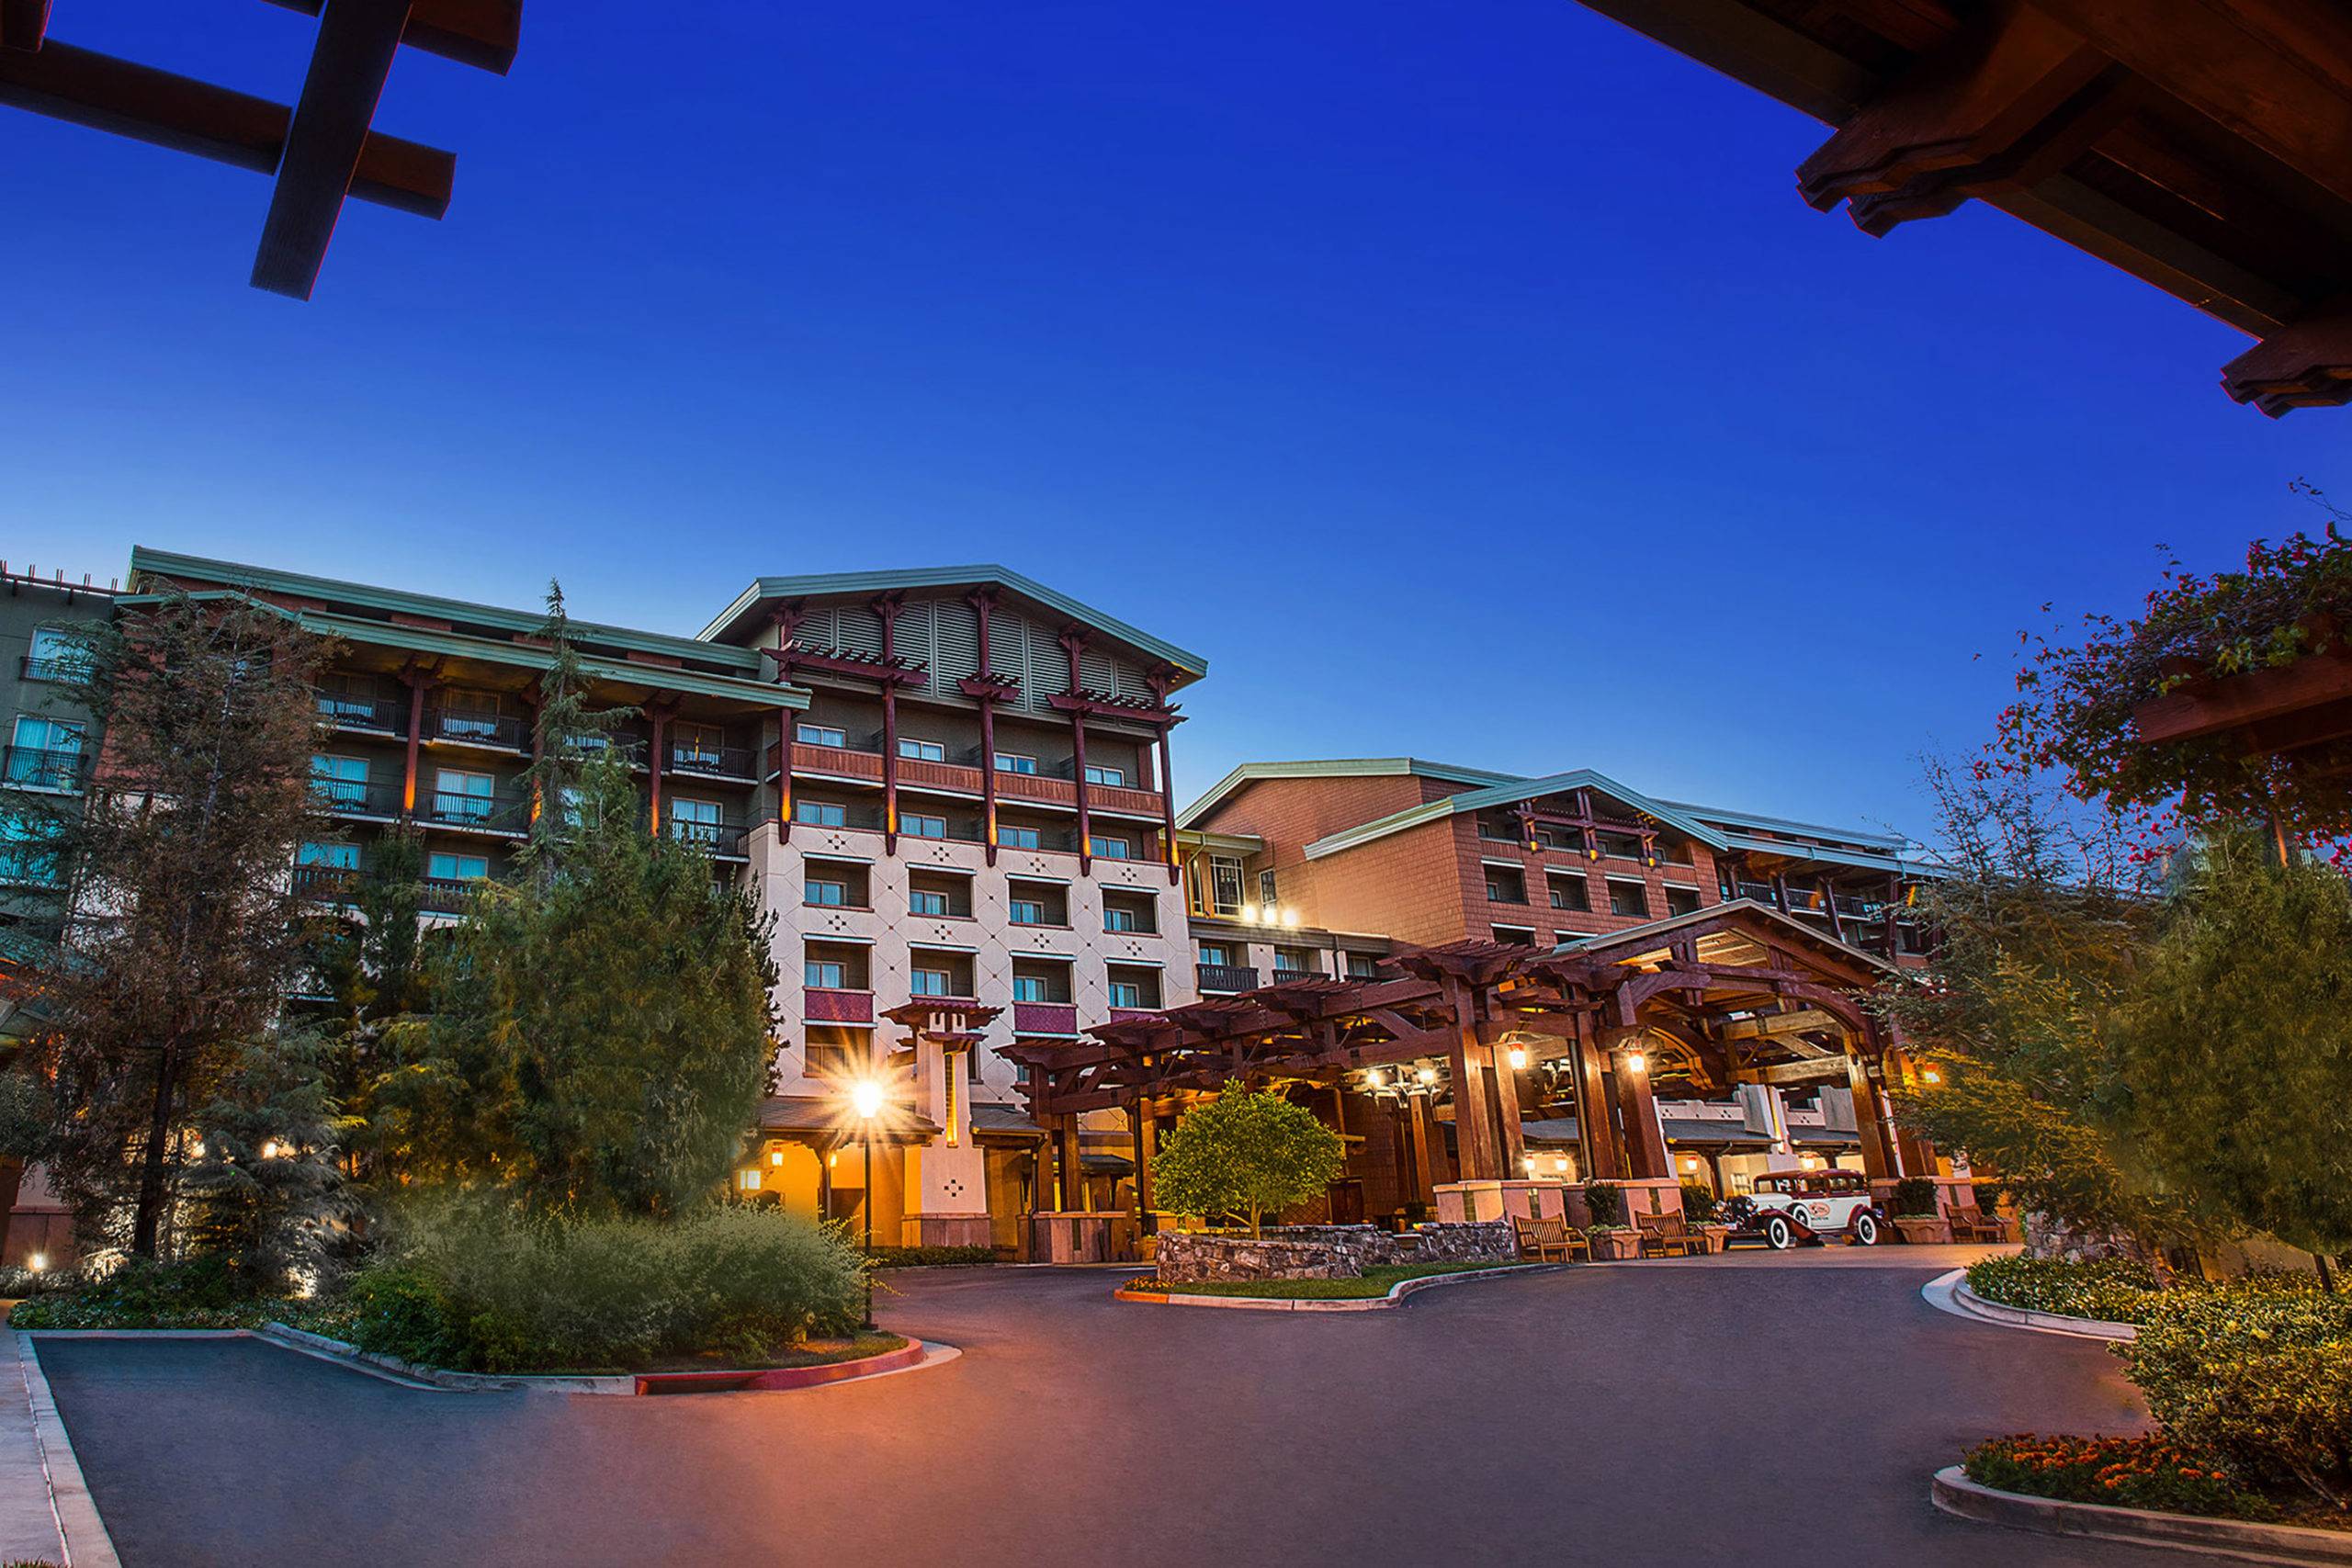 Disney's Grand Californian Hotel &amp; Spa (pictured) plans to reopen on April 29, 2021